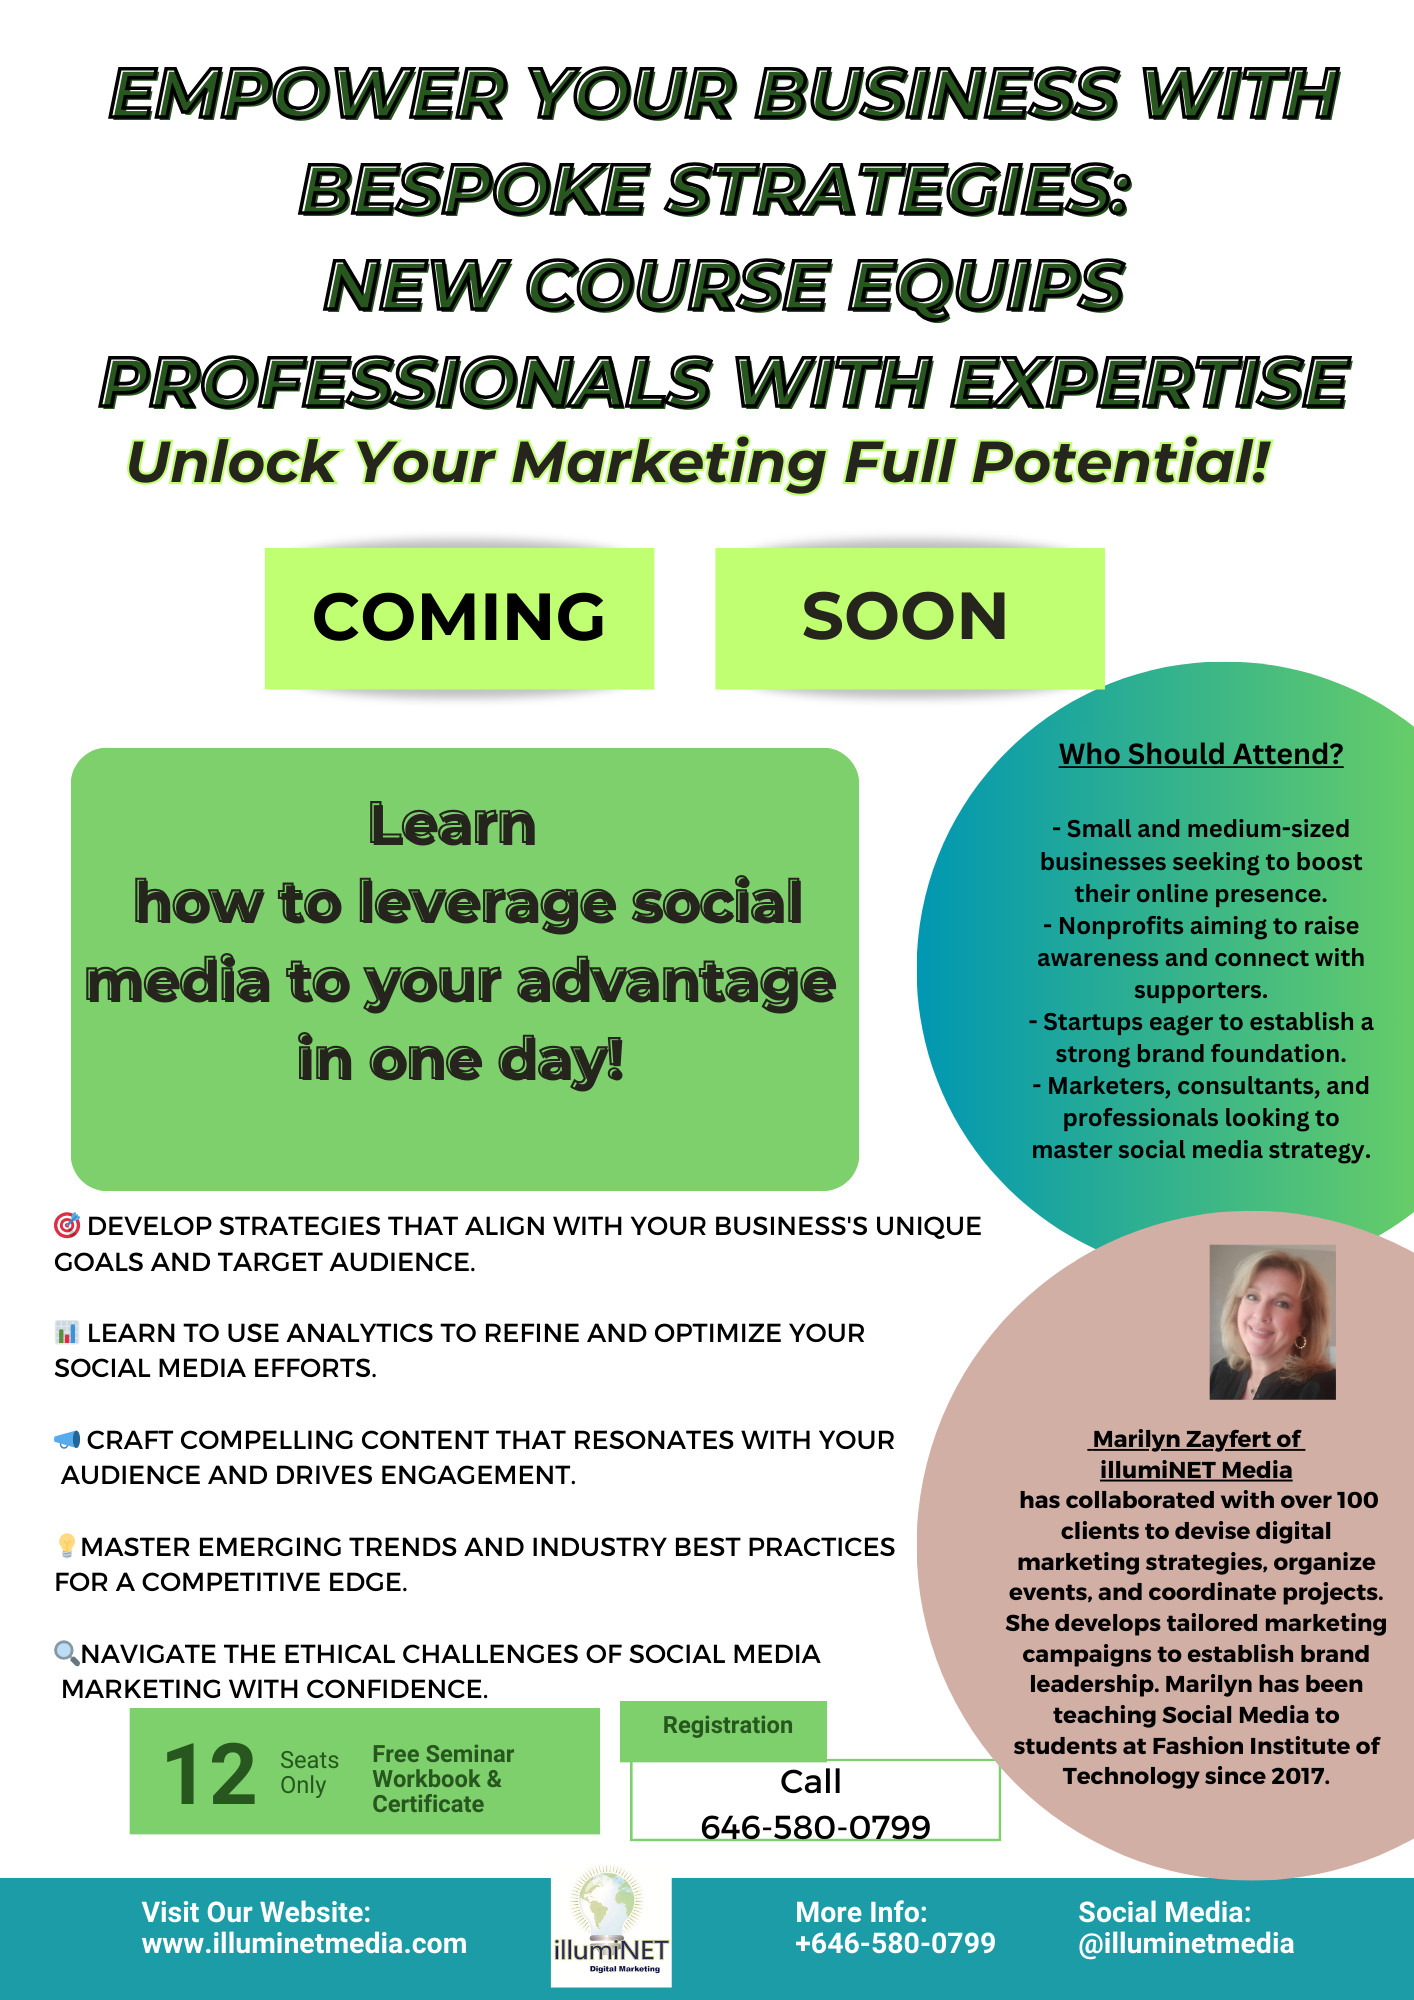 Empower Your Business with Bespoke Strategies: New Course Equips Professionals with Expertise